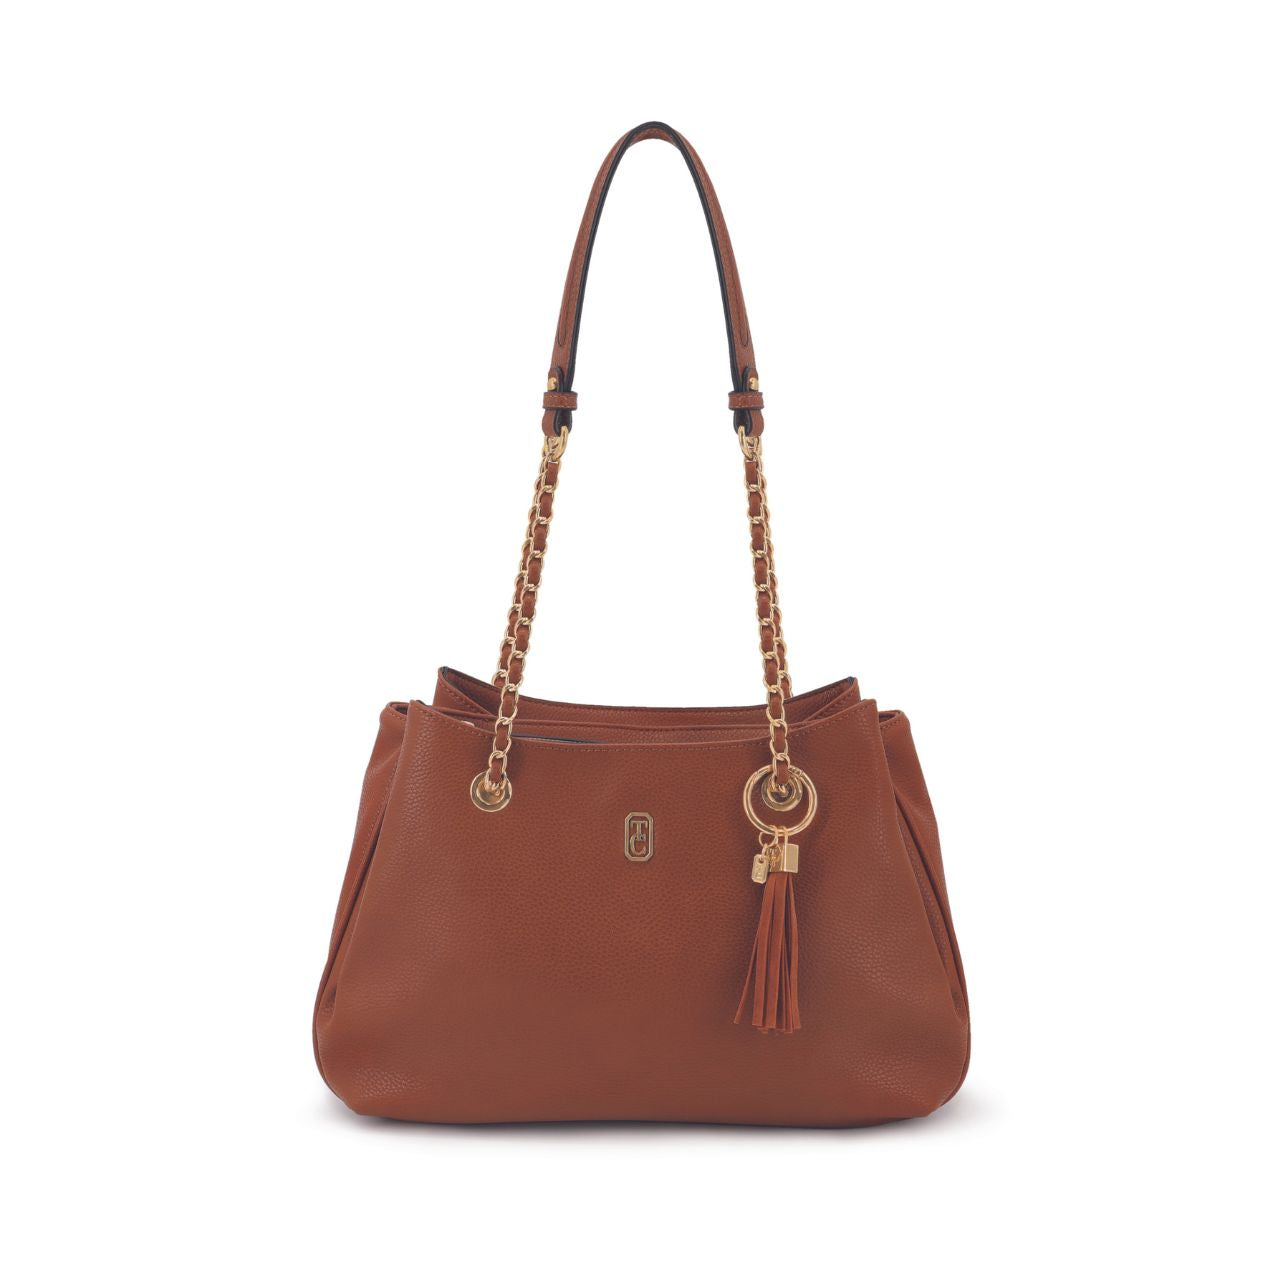 This Tipperary Regency Handbag in Brown is a must-have for any fashion-forward individual. With its elegant design and expert craftsmanship, it exudes sophistication and style. The premium brown leather, sturdy construction, and spacious interior make it both practical and luxurious. Enhance your wardrobe with this timeless accessory.